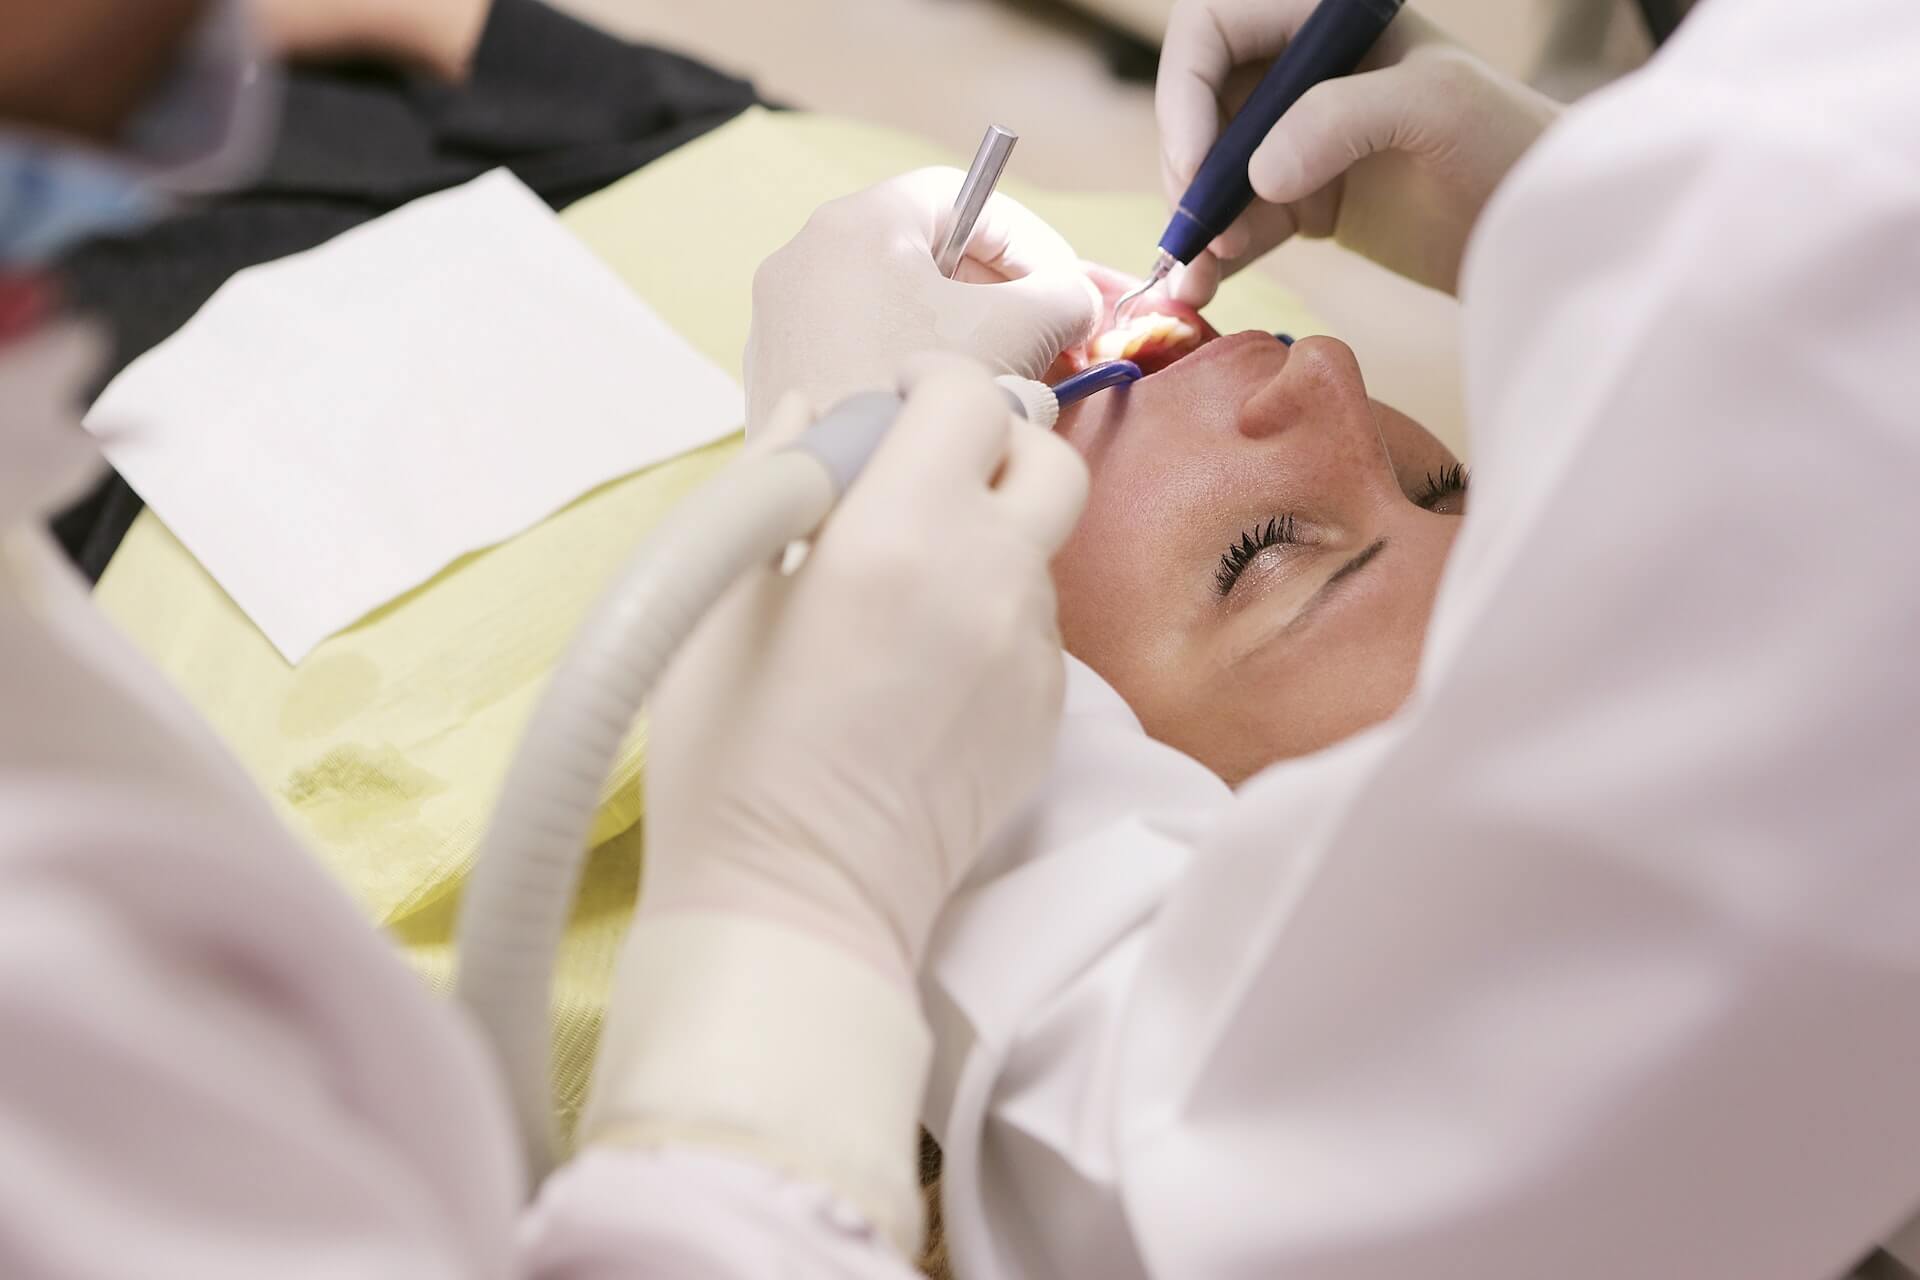 A dentist performs oral surgery on a patient.